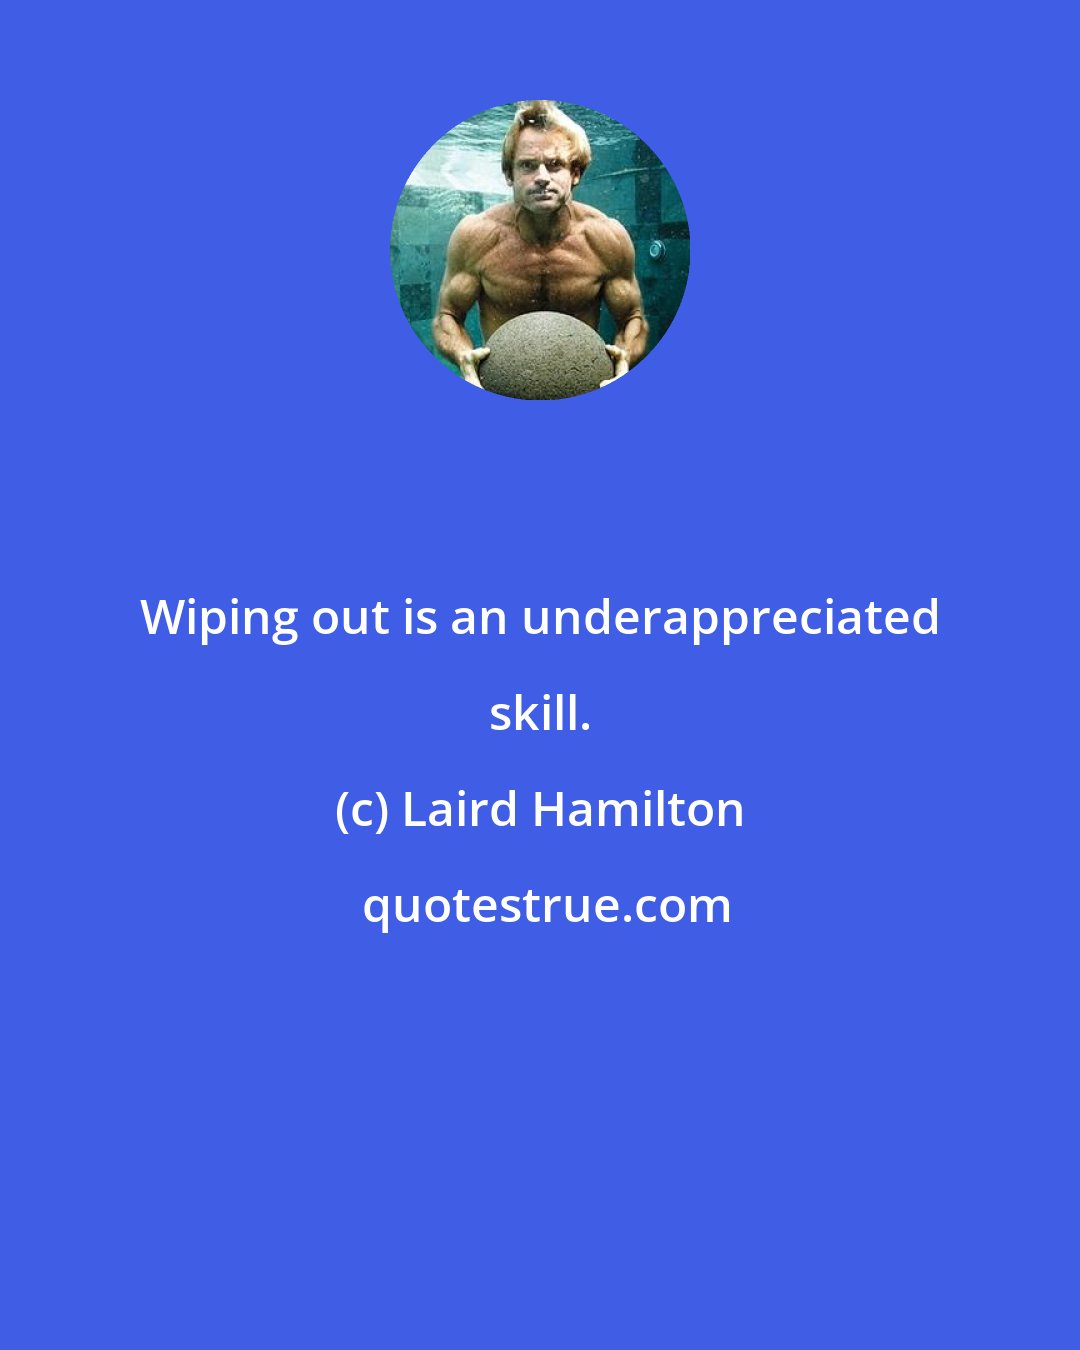 Laird Hamilton: Wiping out is an underappreciated skill.